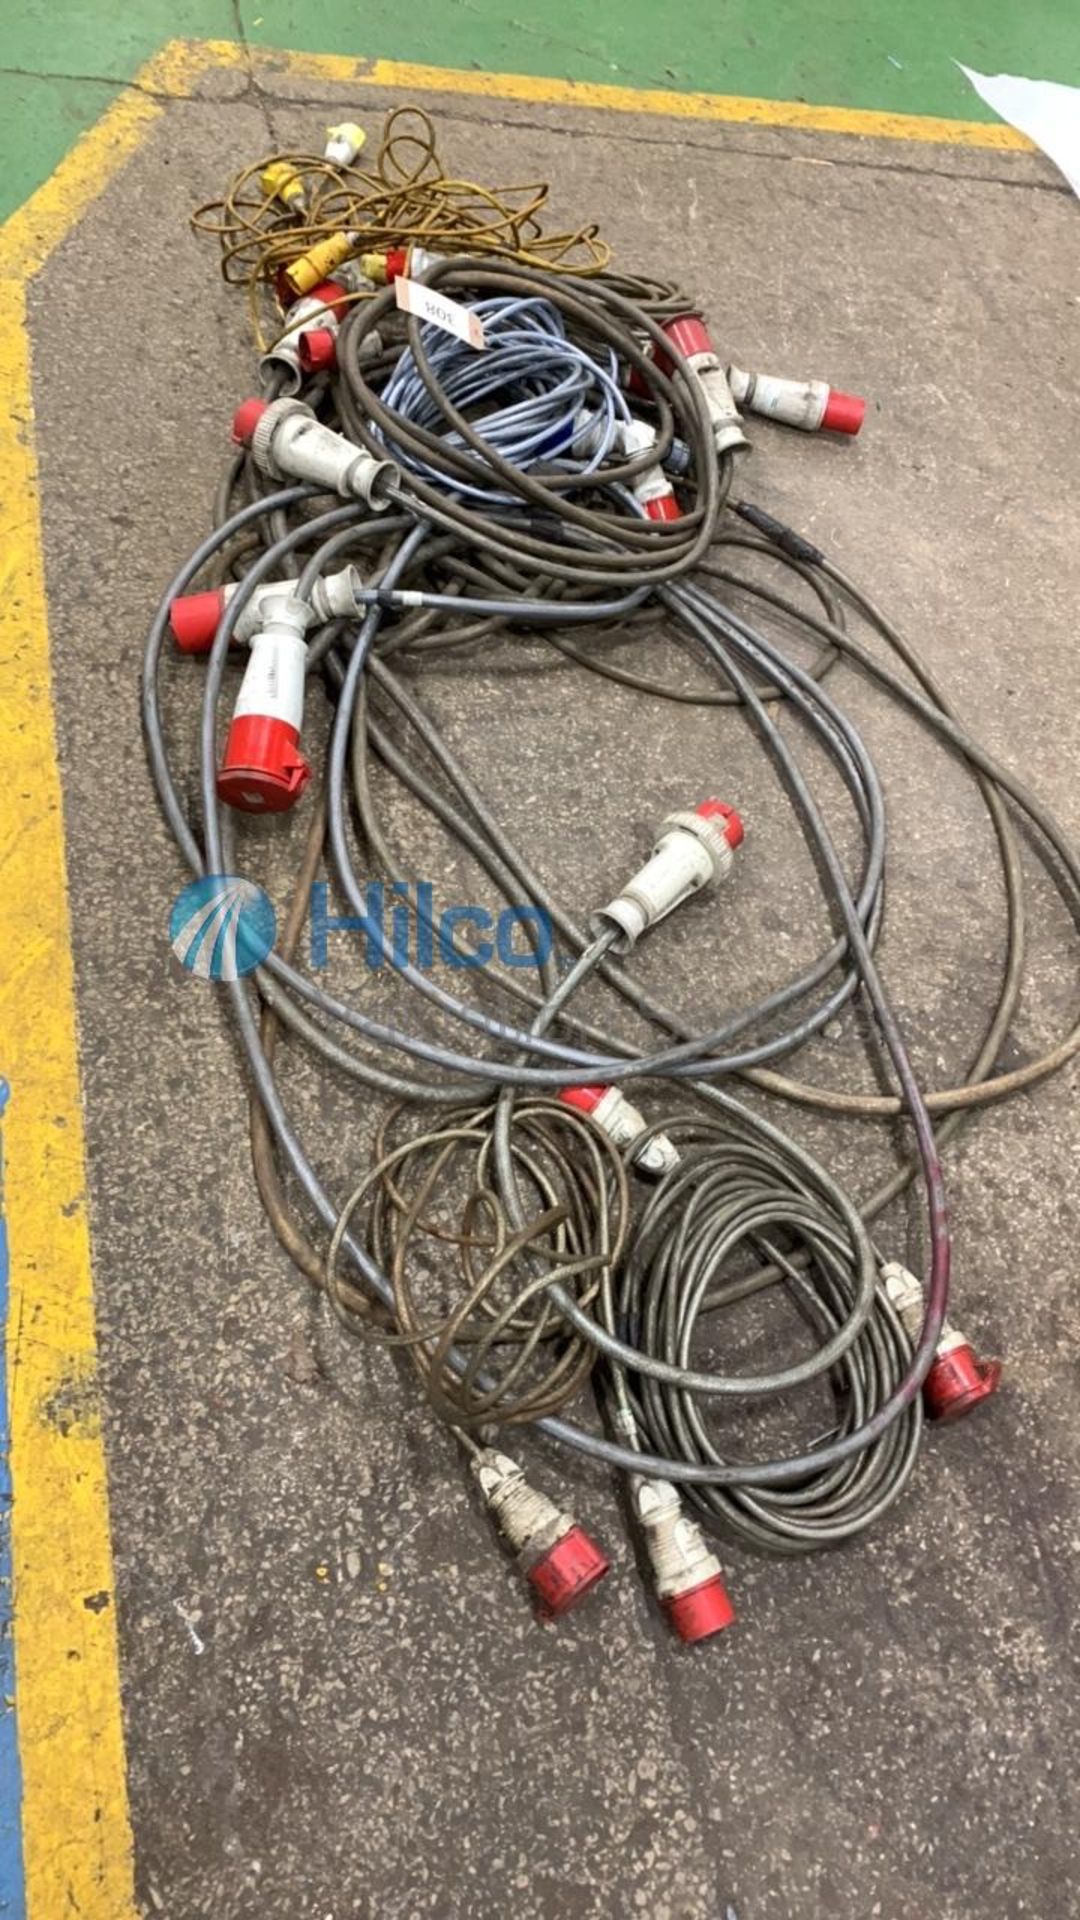 Quantity of Electrical Extension Leads